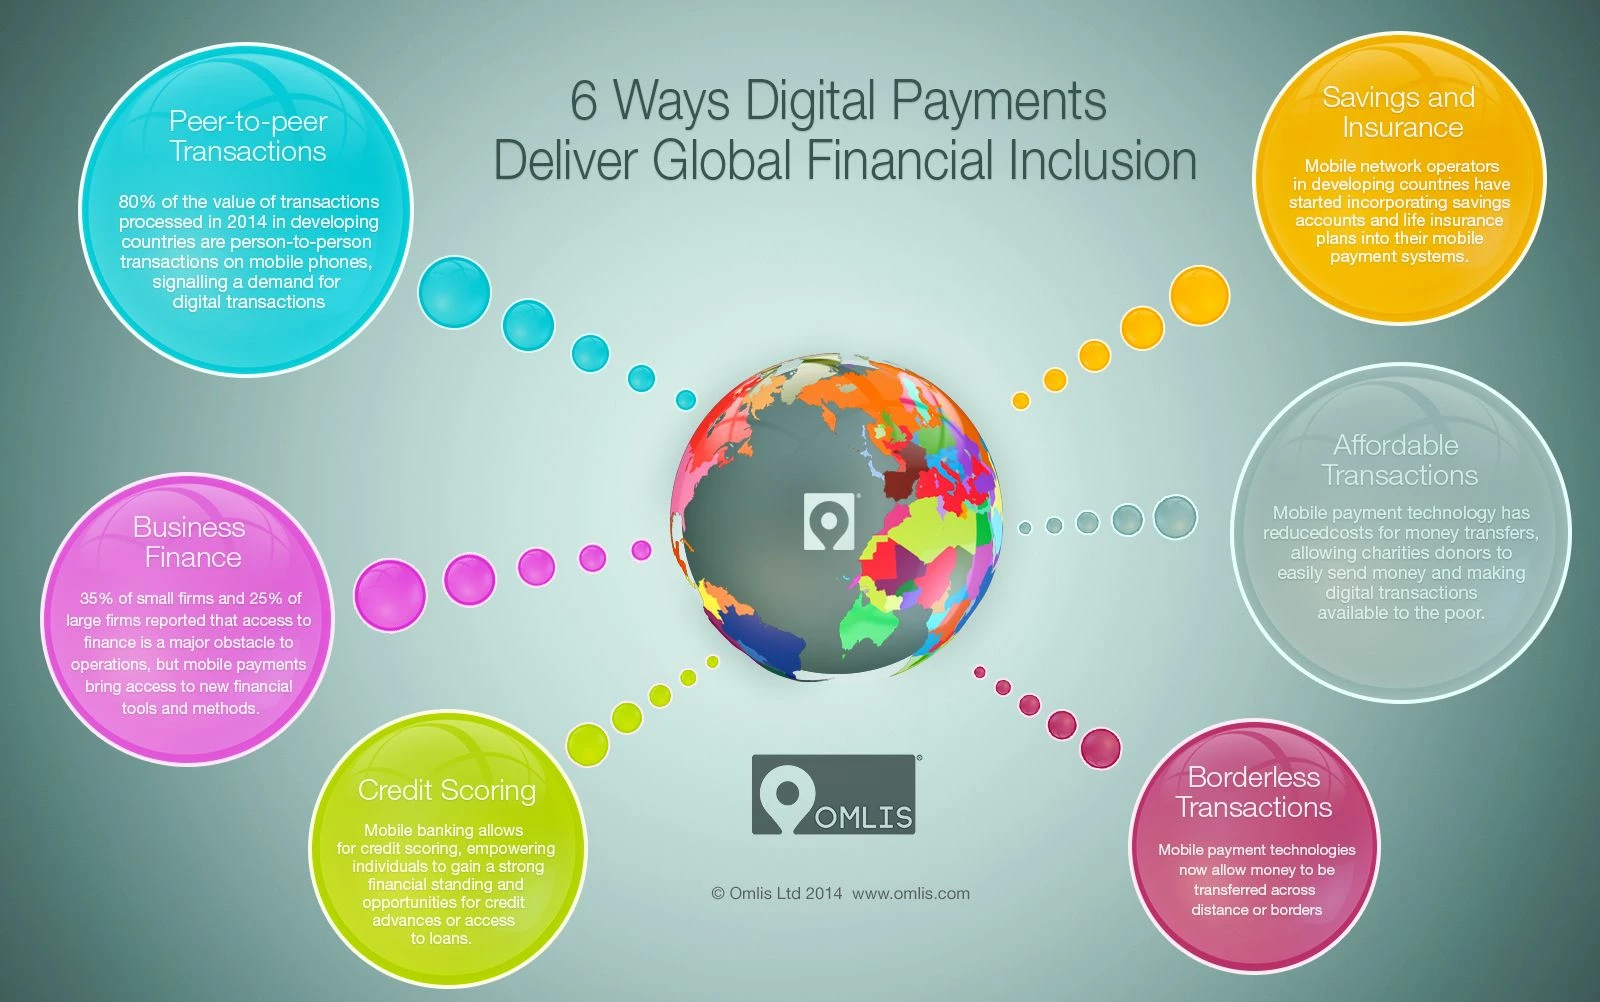 6 Ways Mobile Payments Deliver Financial Inclusion